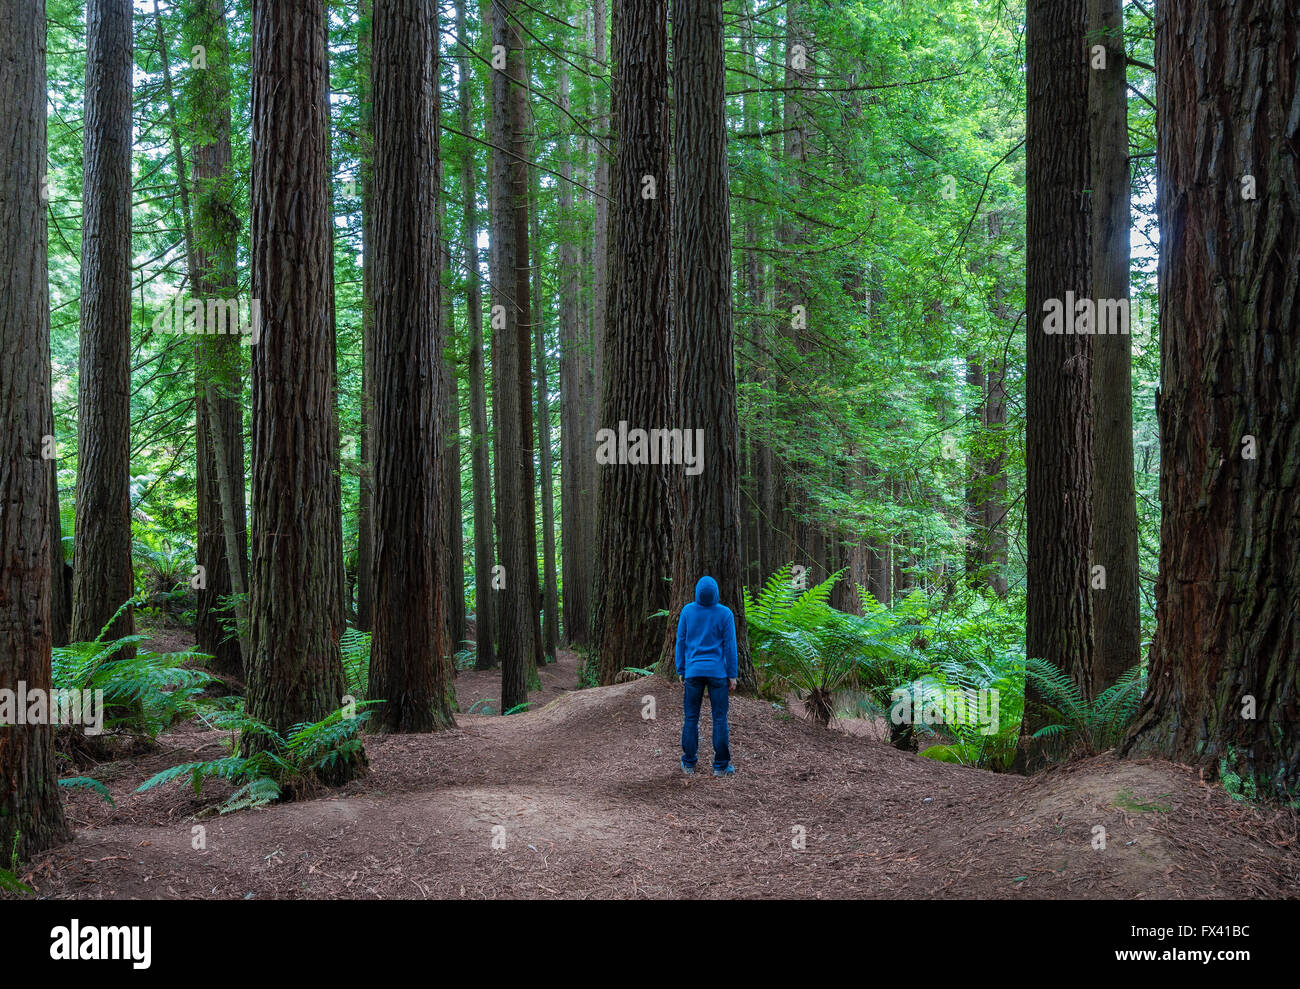 Man looking up in a forest Banque D'Images